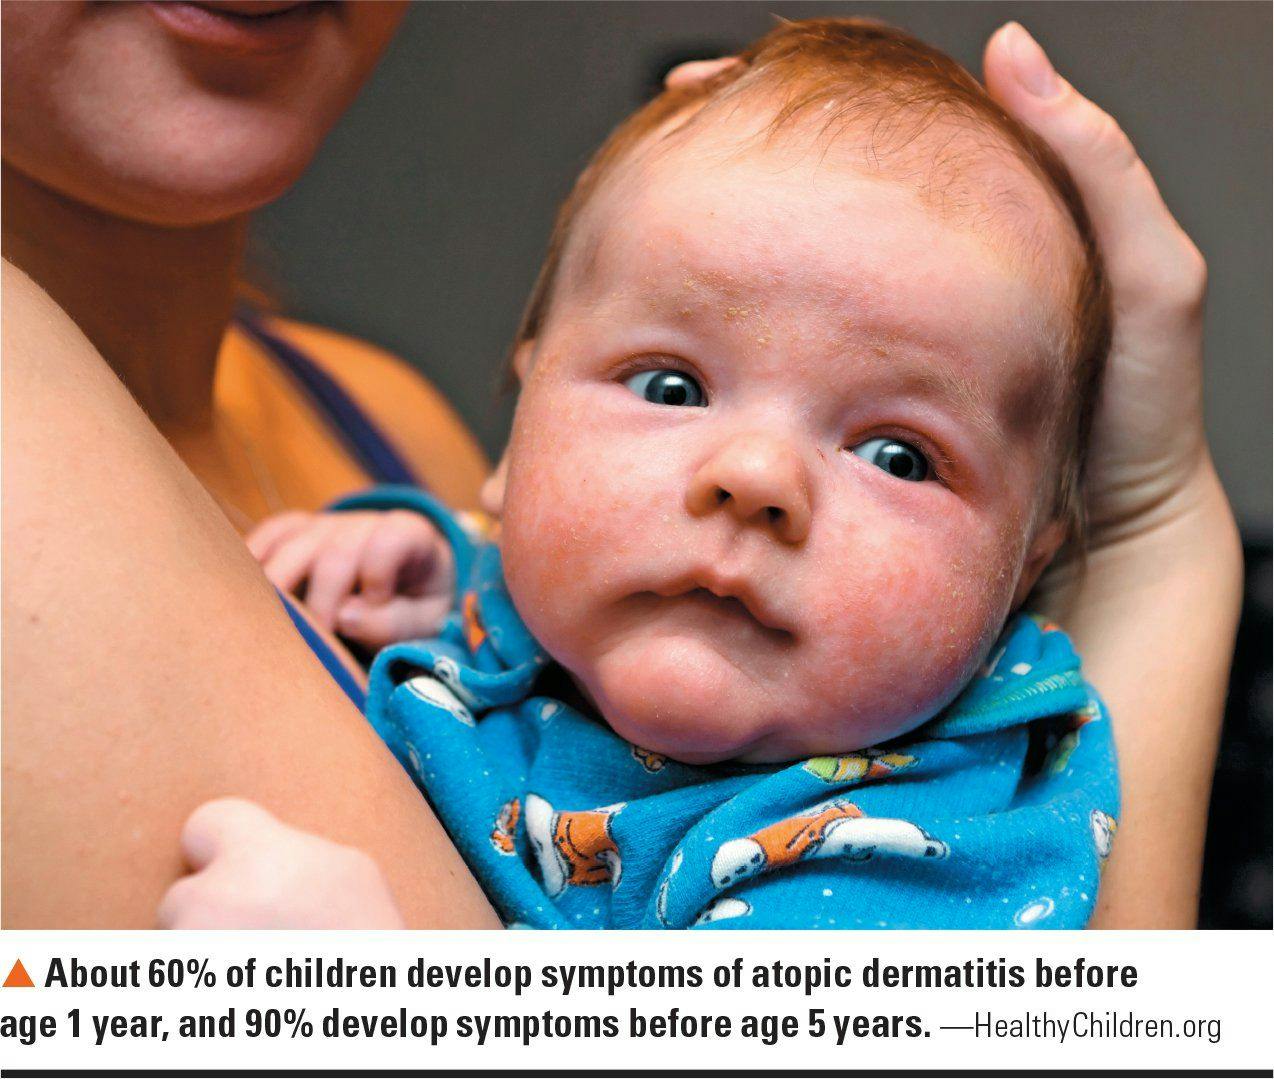 statistic about atopic dermatitis